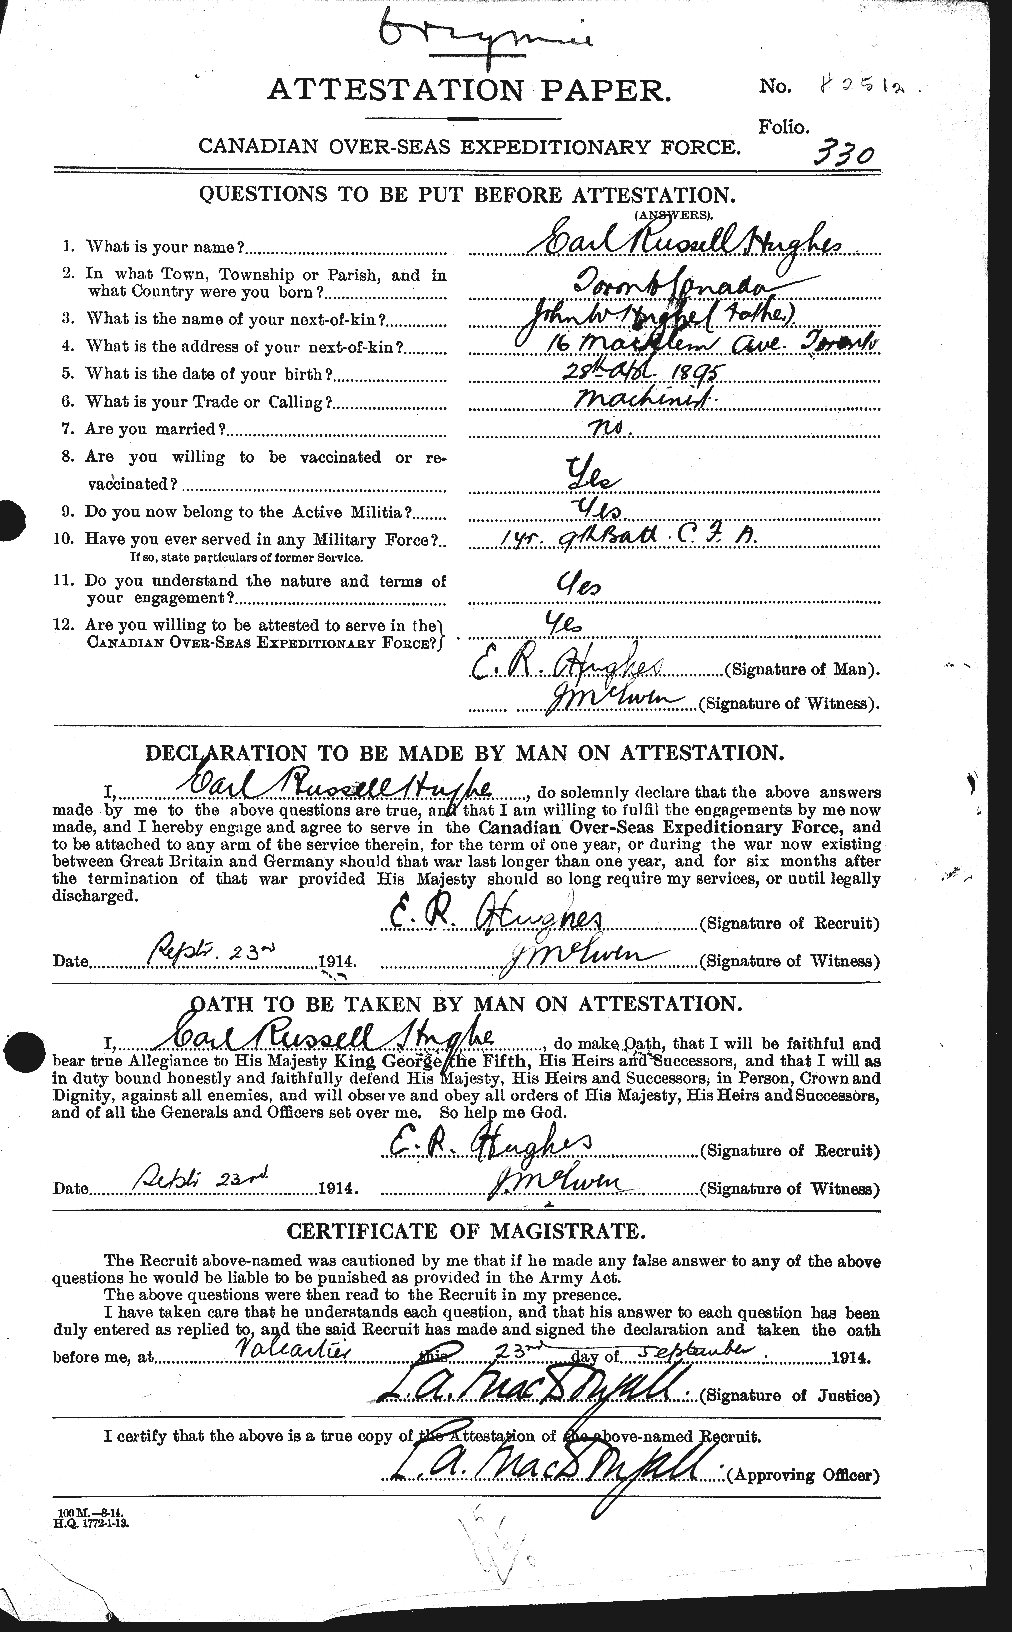 Personnel Records of the First World War - CEF 402656a